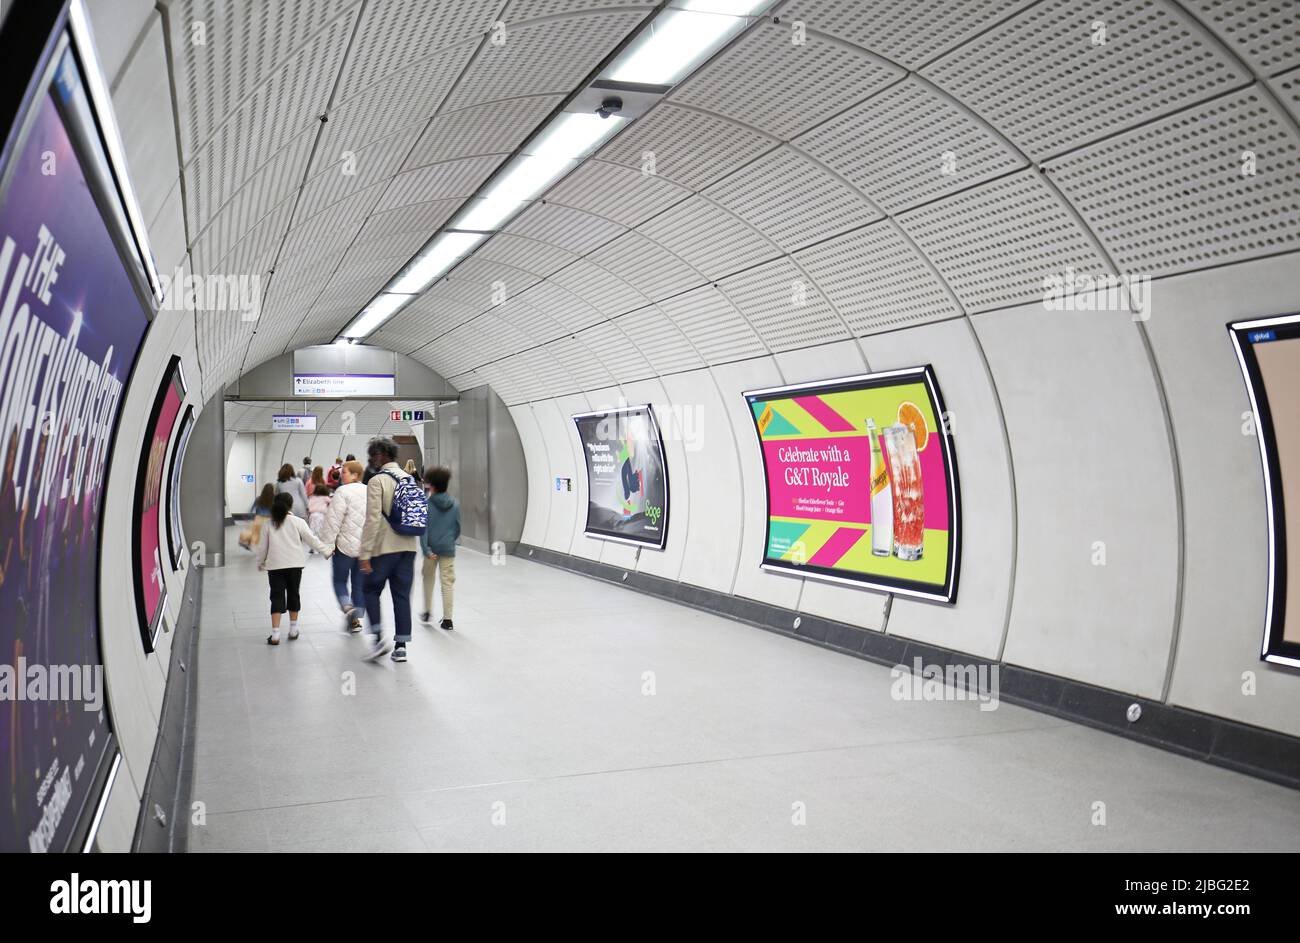 London, UK. Underground access tunnels at Liverpool Street Station on the new Elizabeth Line (Crossrail) network. Shows family group passing through. Stock Photo